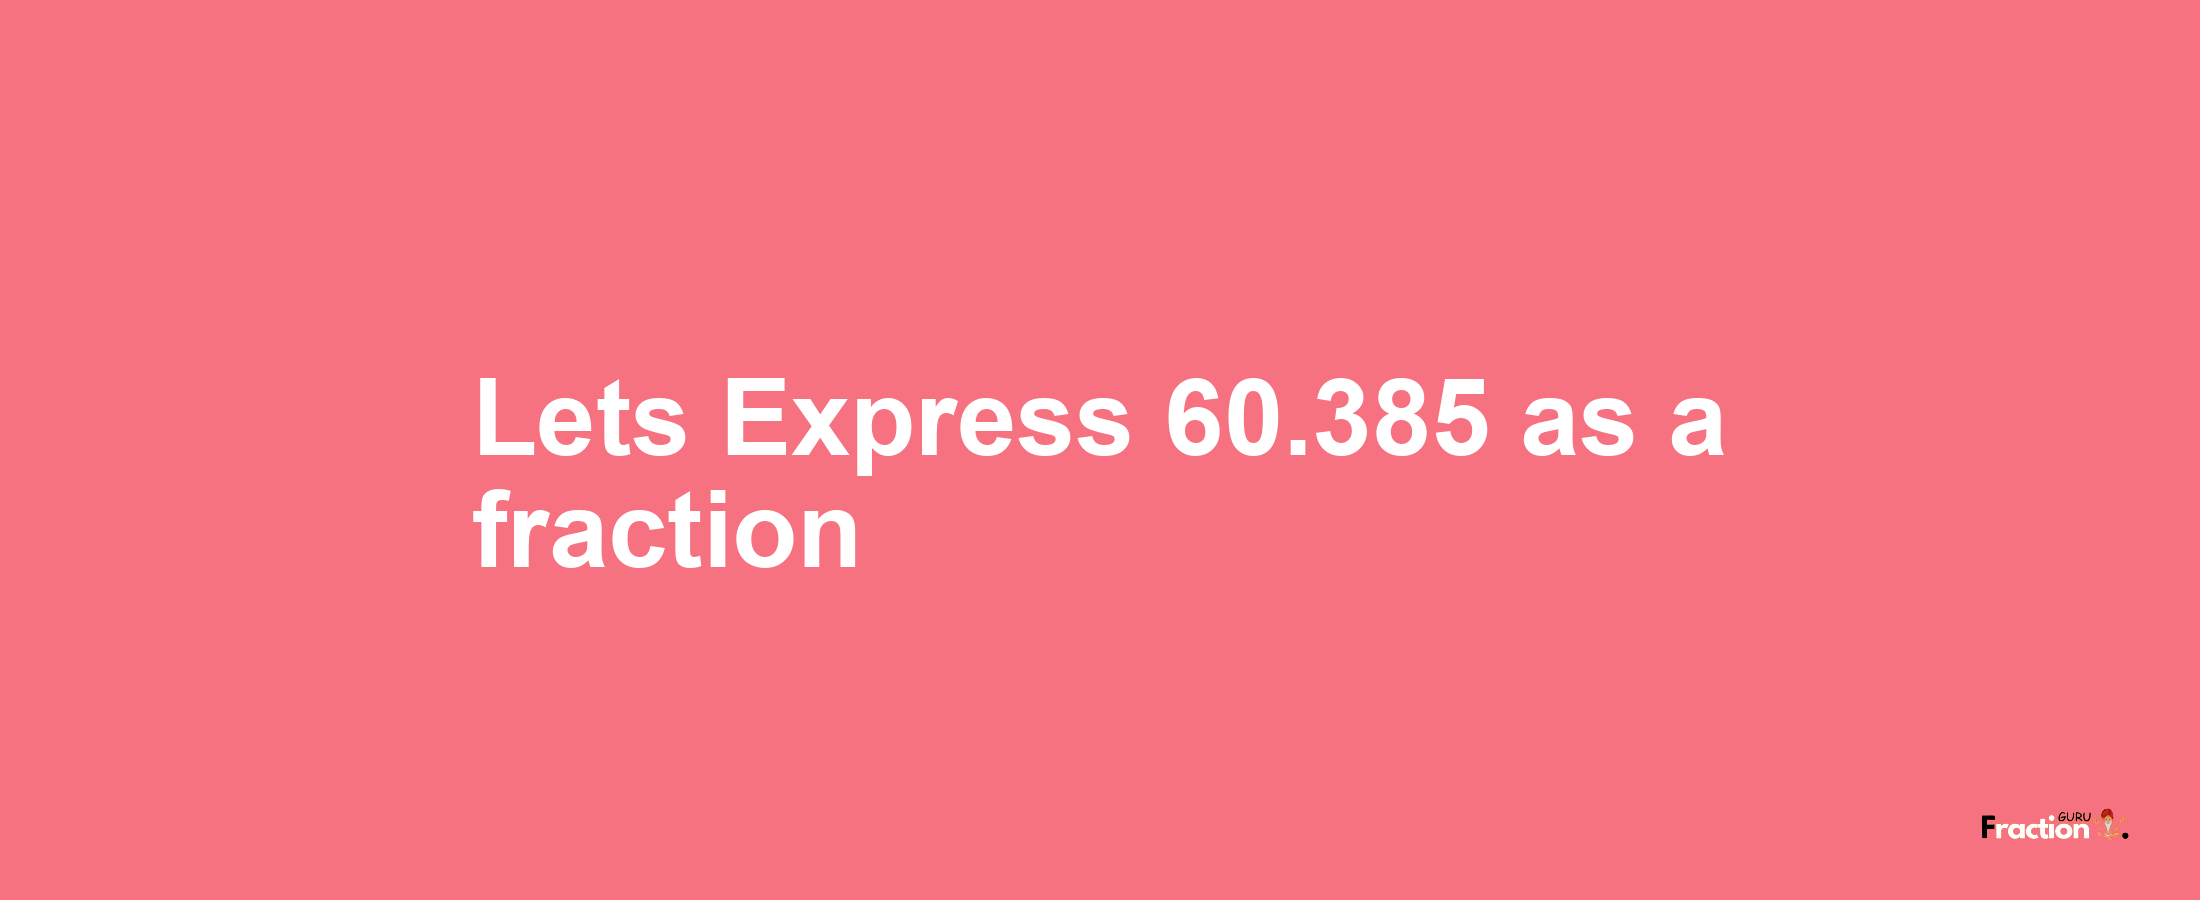 Lets Express 60.385 as afraction